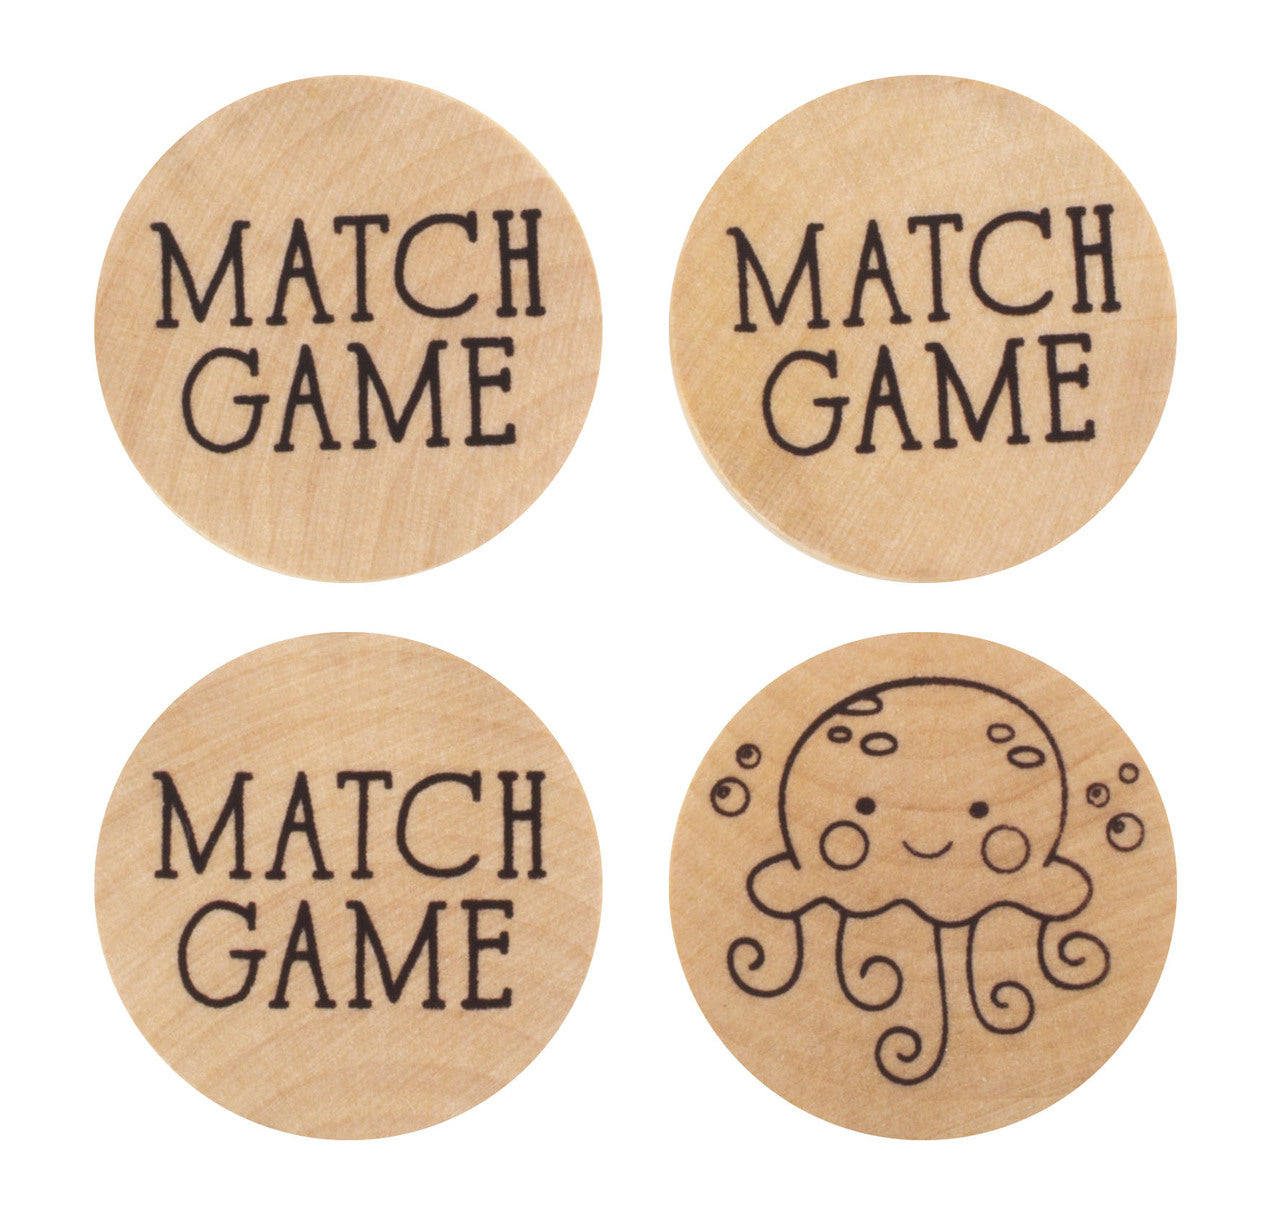 Wooden Match Game in a Bag